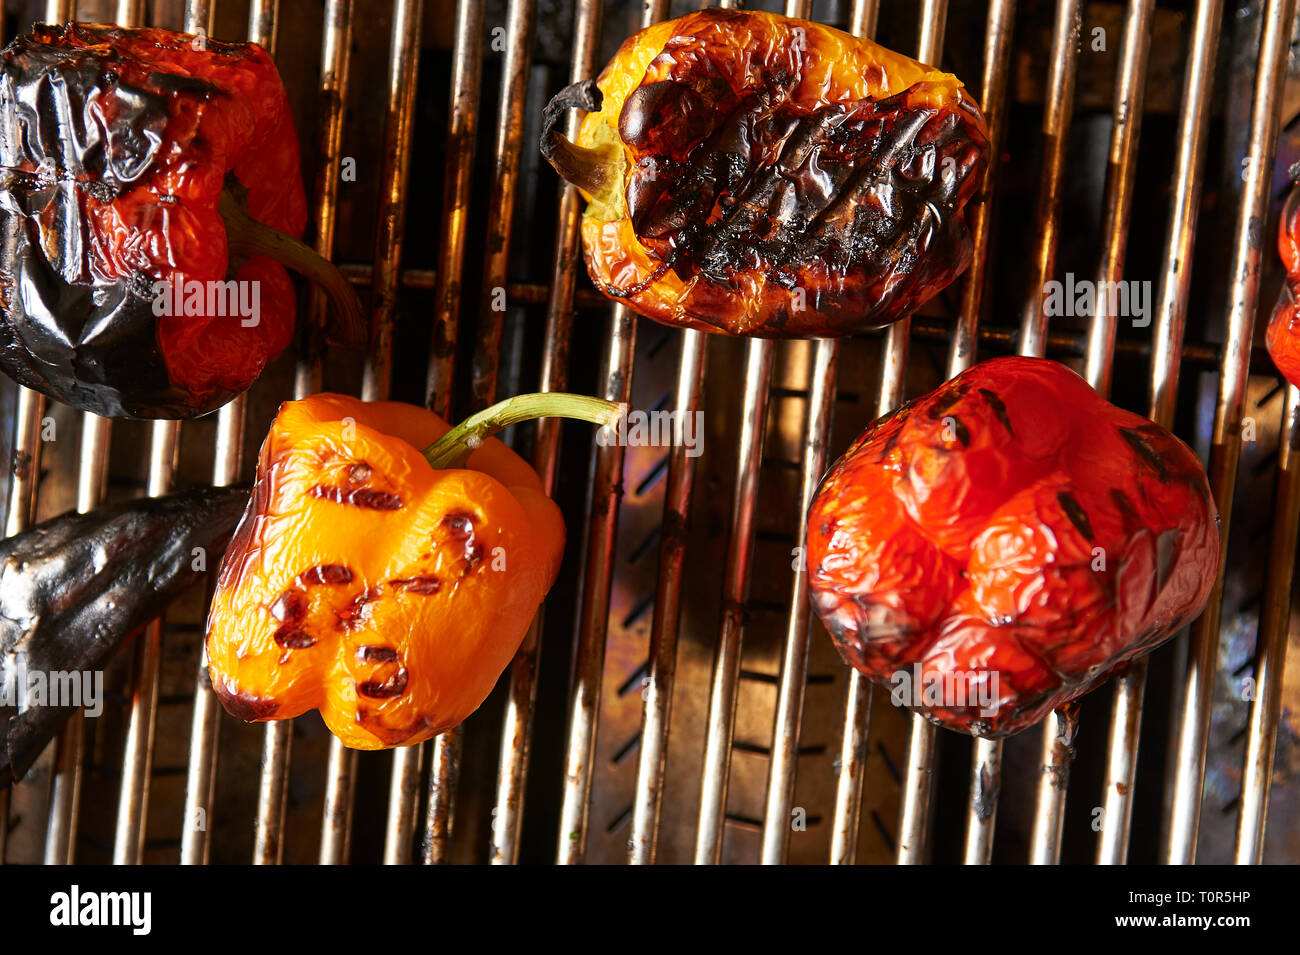 Gemuese Paprika High Resolution Stock Photography and Images - Alamy